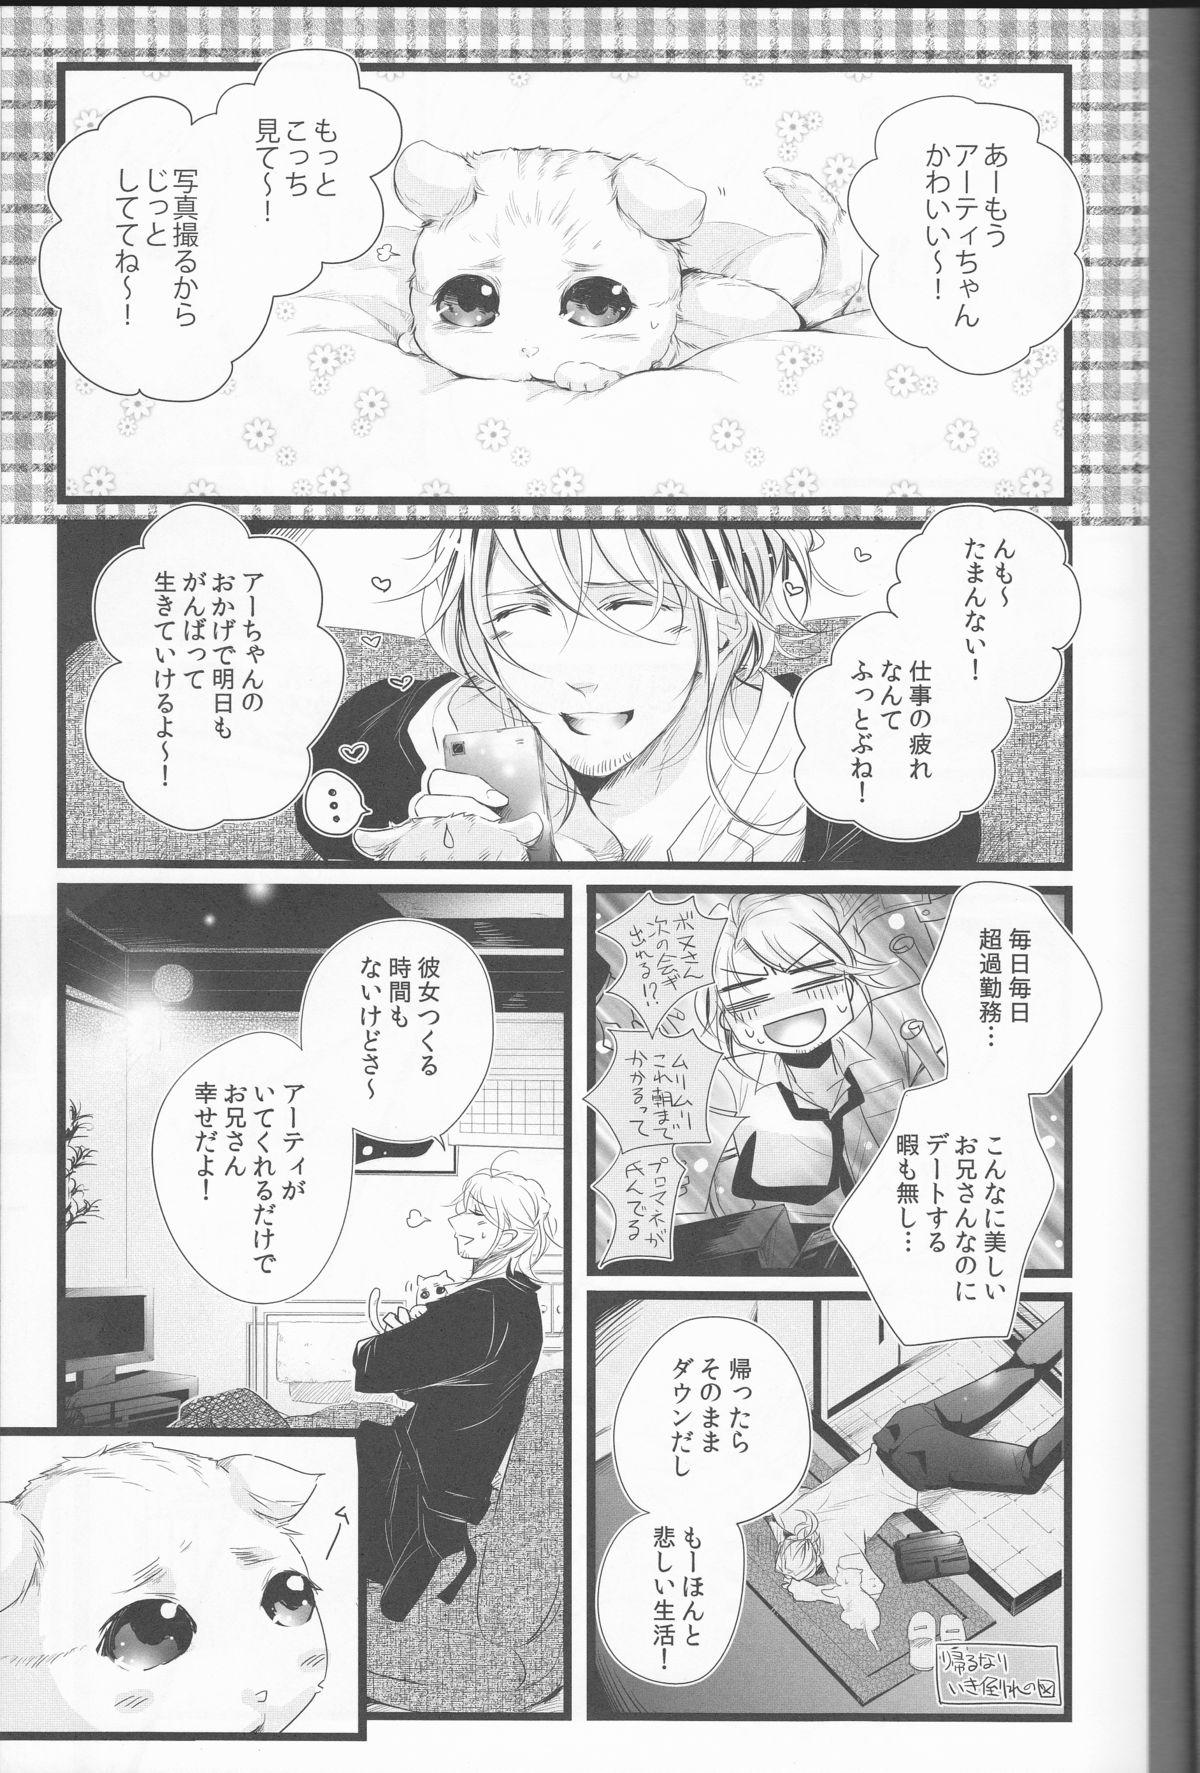 Lesbians ]Bell the cat! - Axis powers hetalia Rubia - Page 4